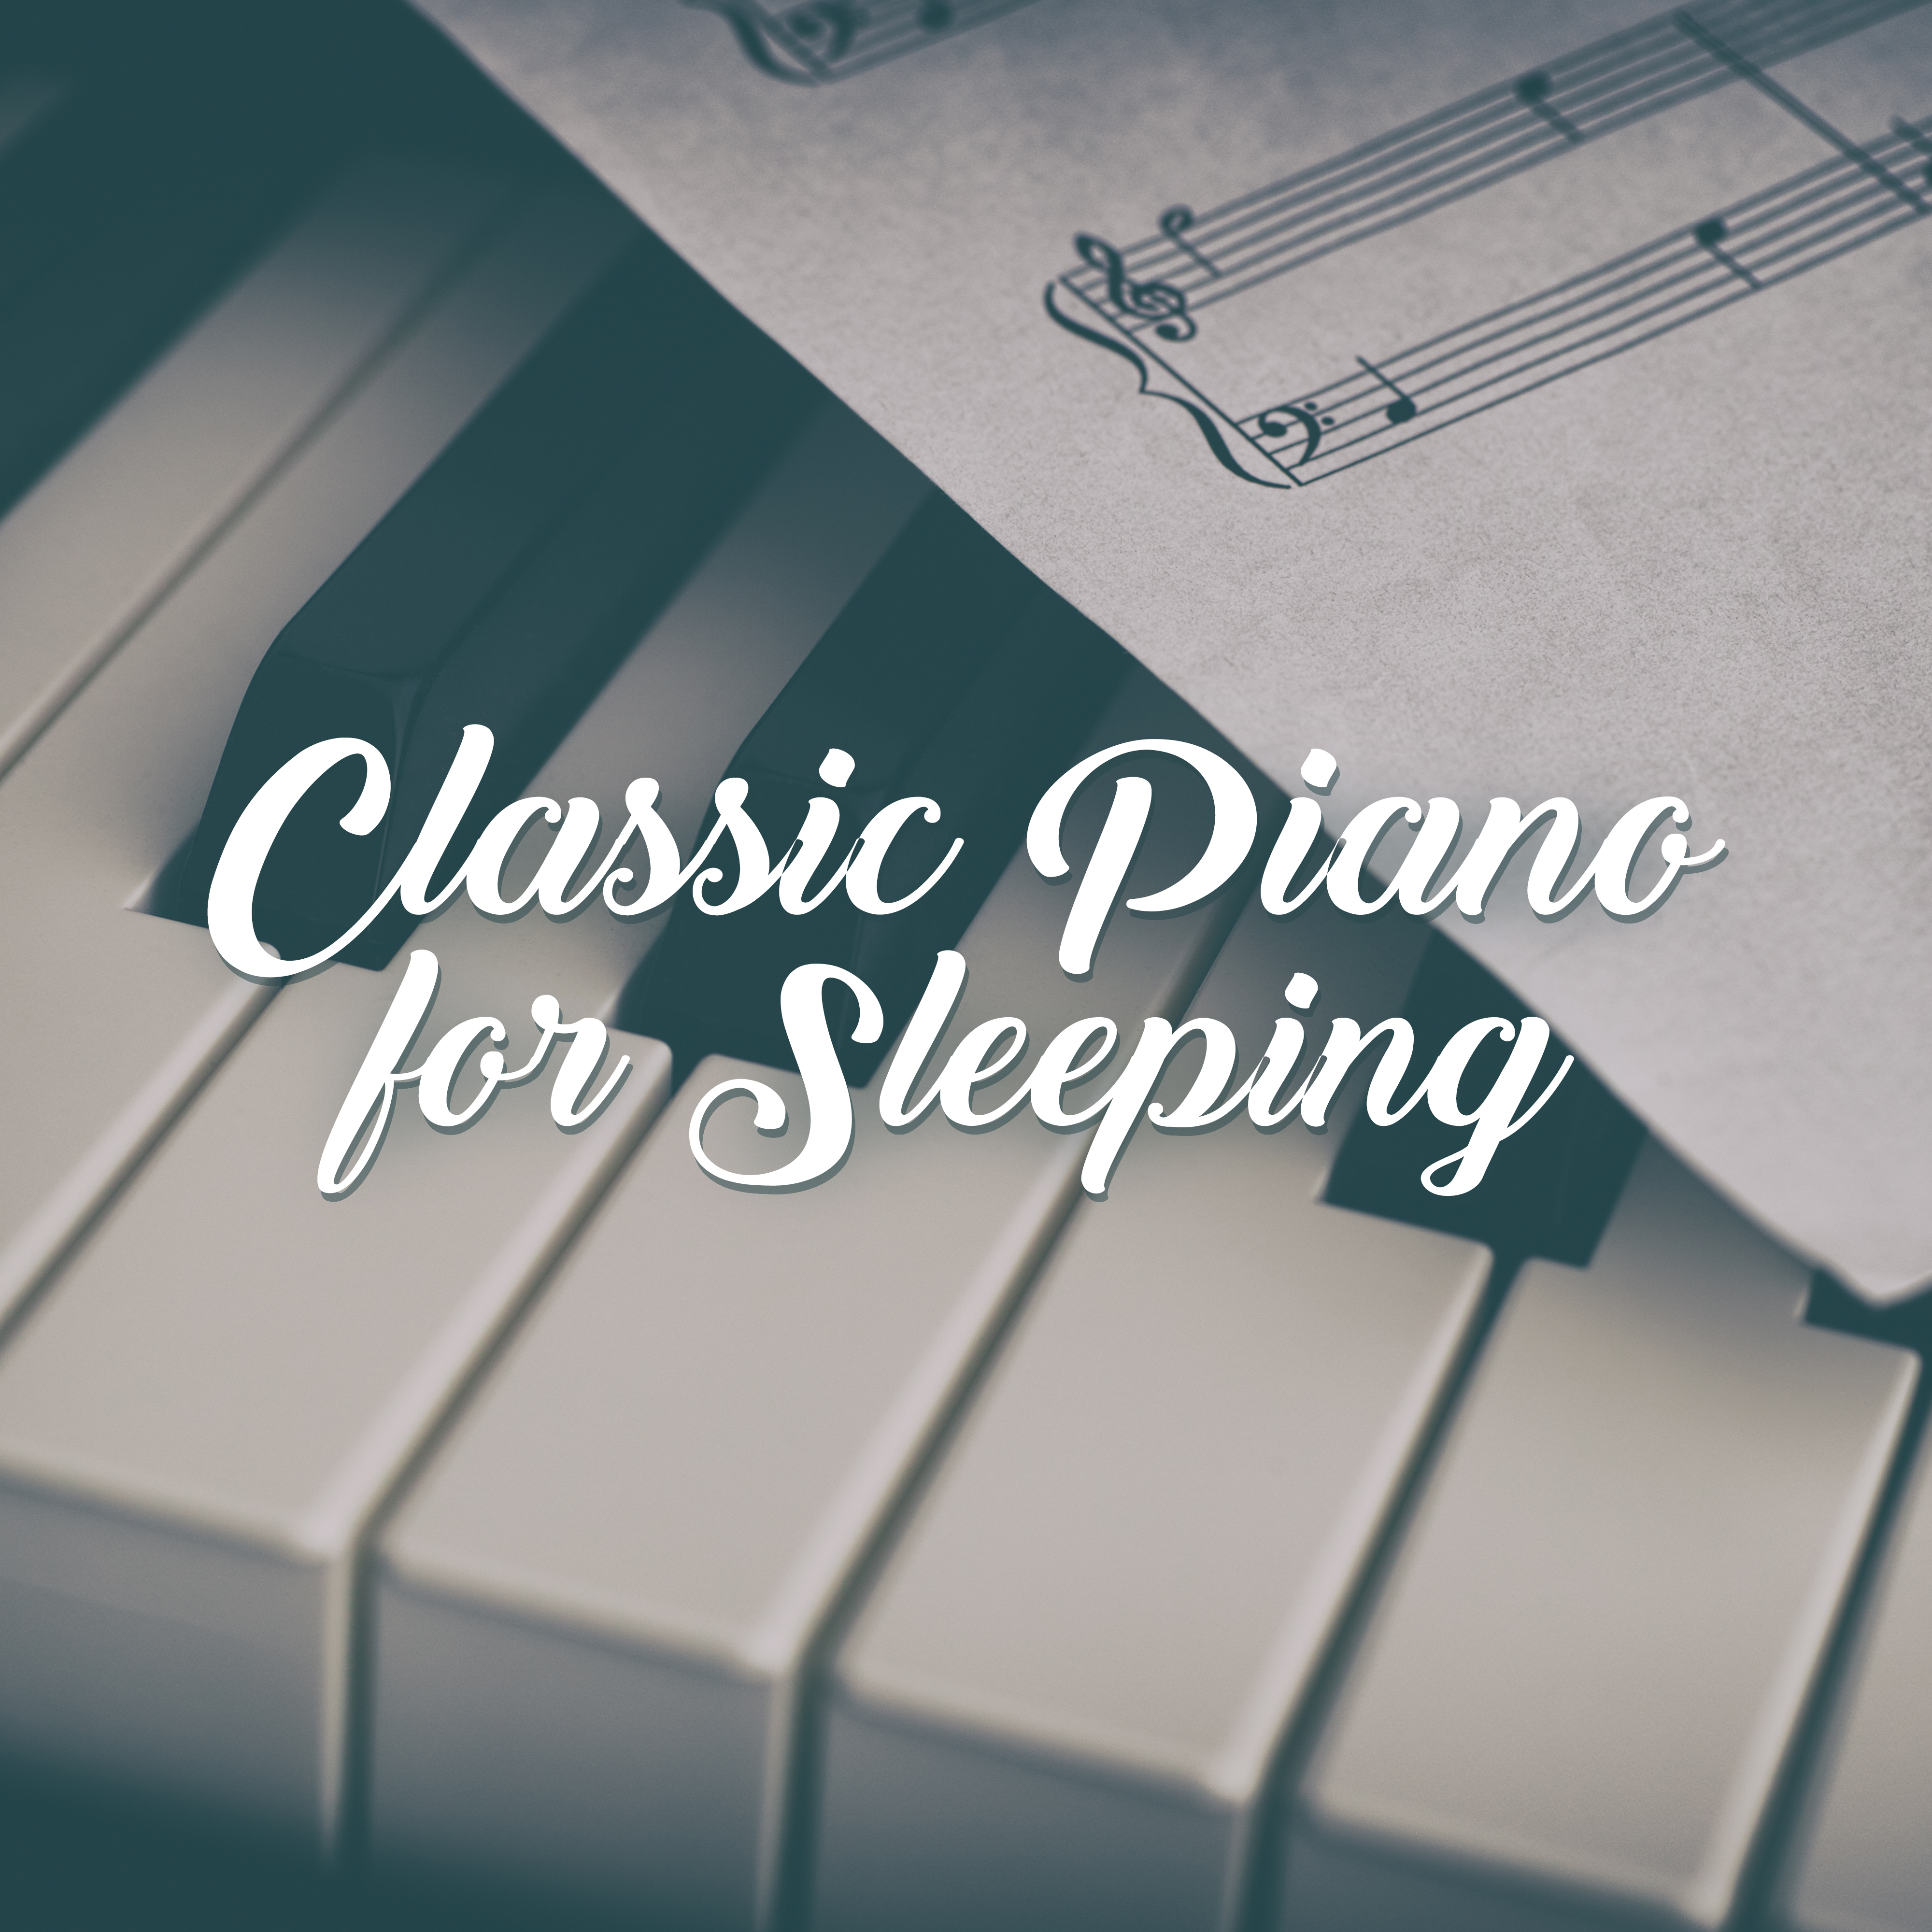 Classic Piano for Sleeping